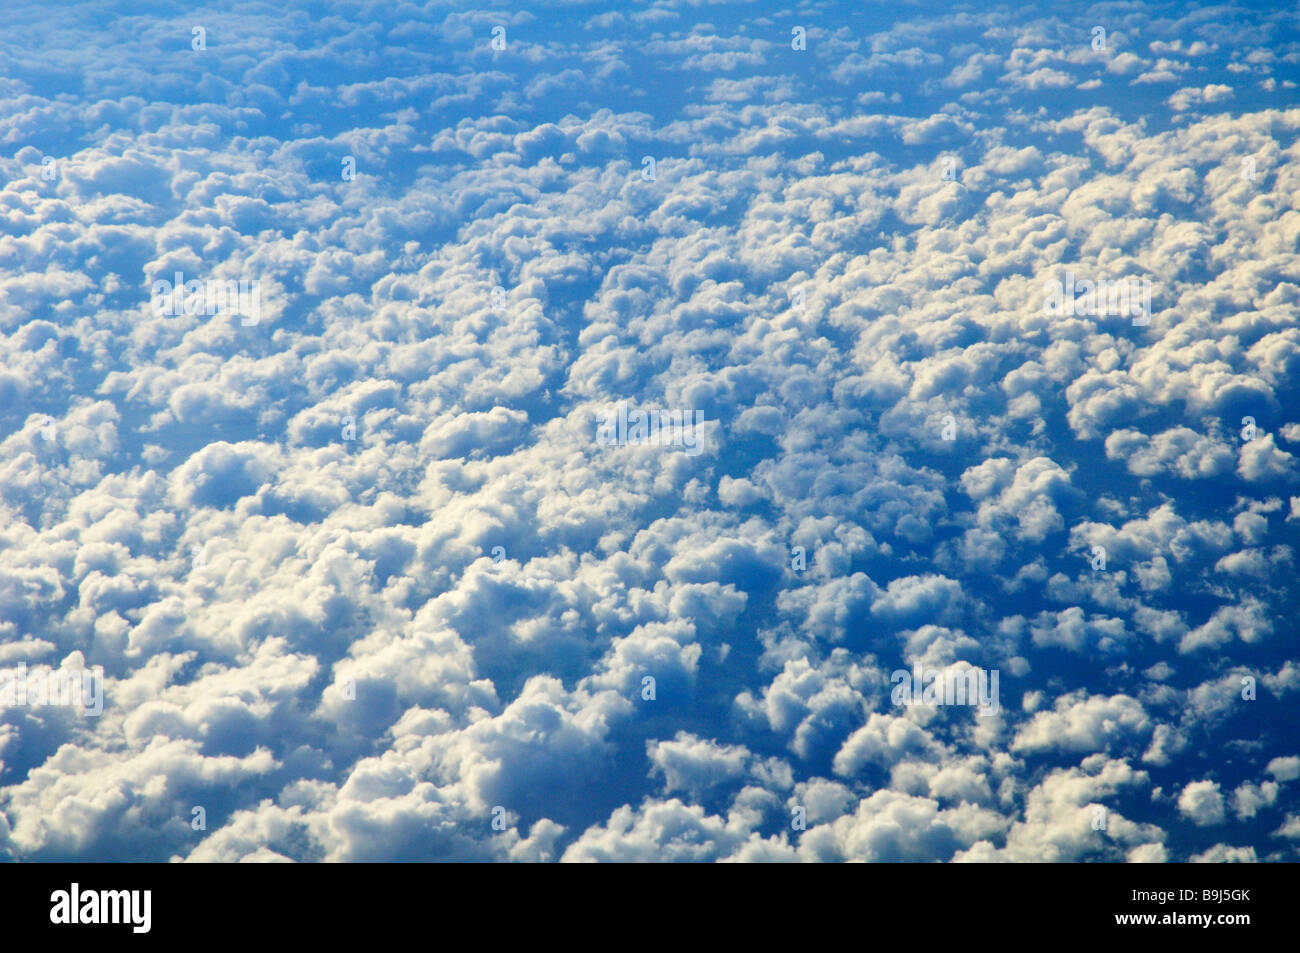 Clouds seen from above Stock Photo